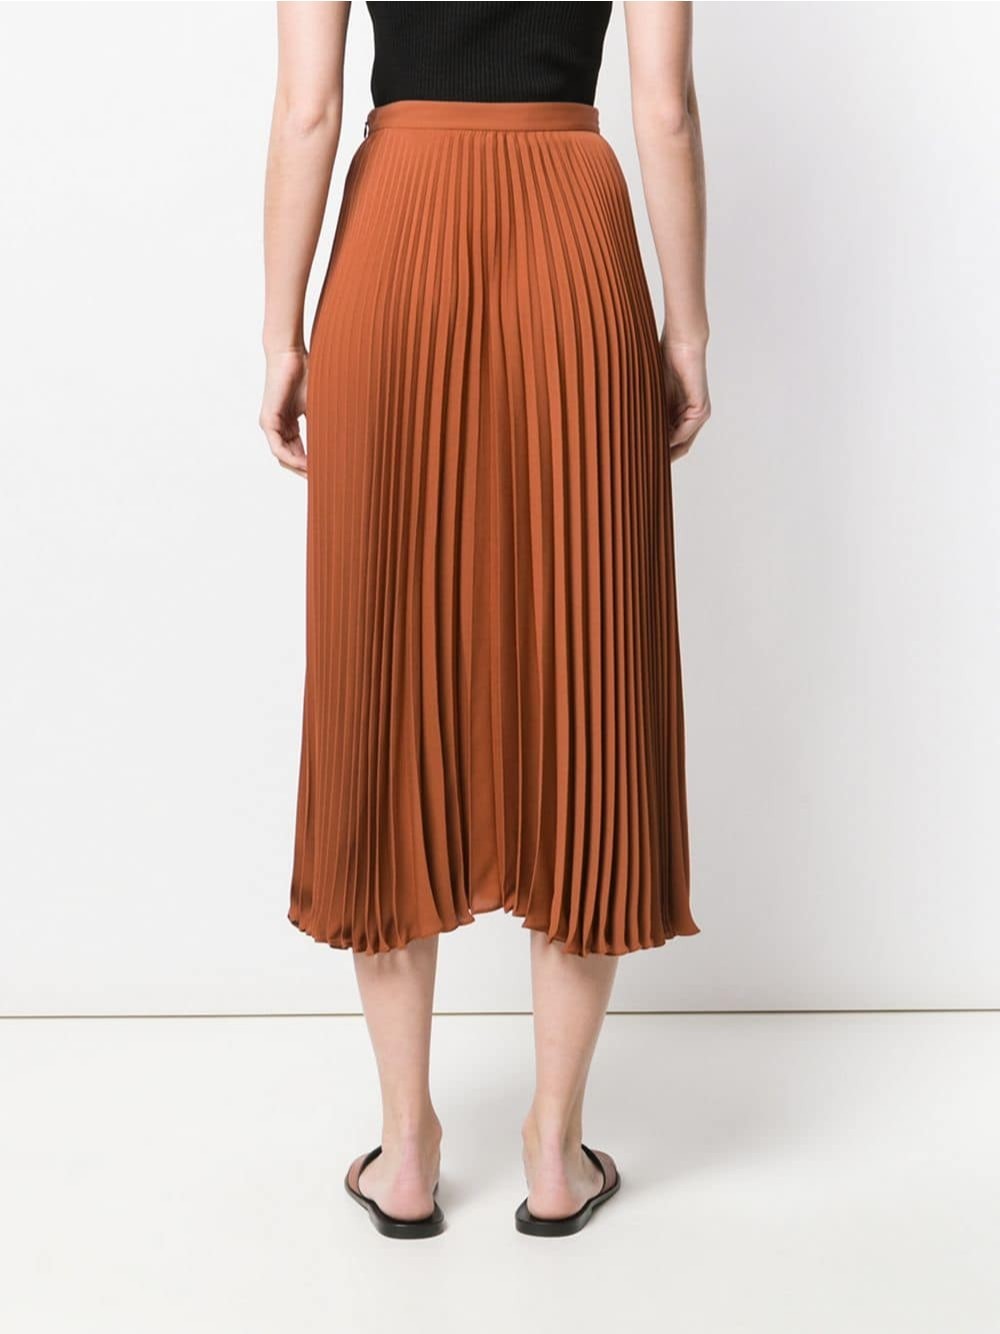 valentino SKIRT available on montiboutique.com - 27848